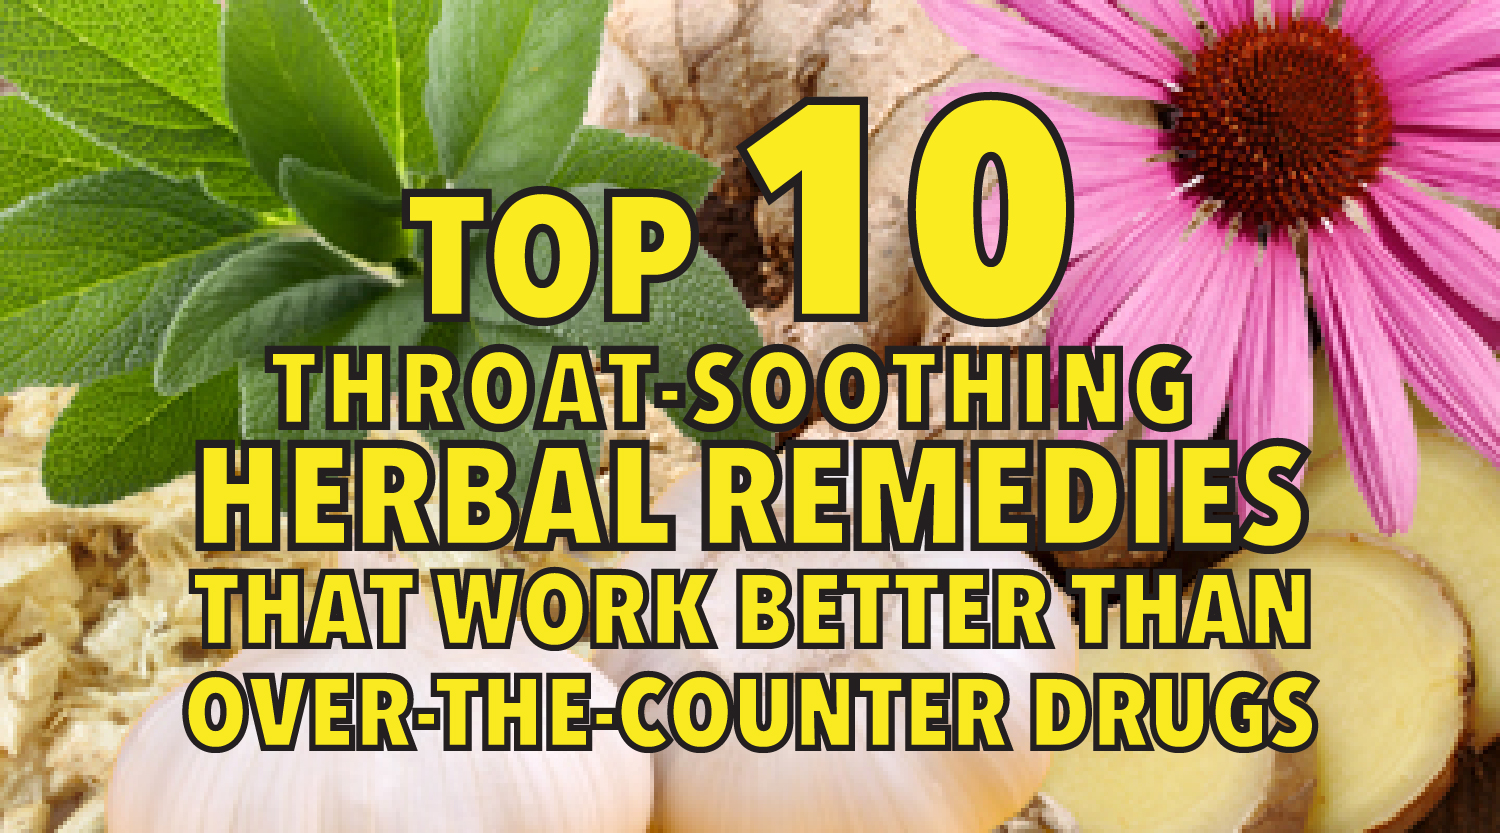 Top 10 throat-soothing herbal remedies that work better than over-the-counter drugs